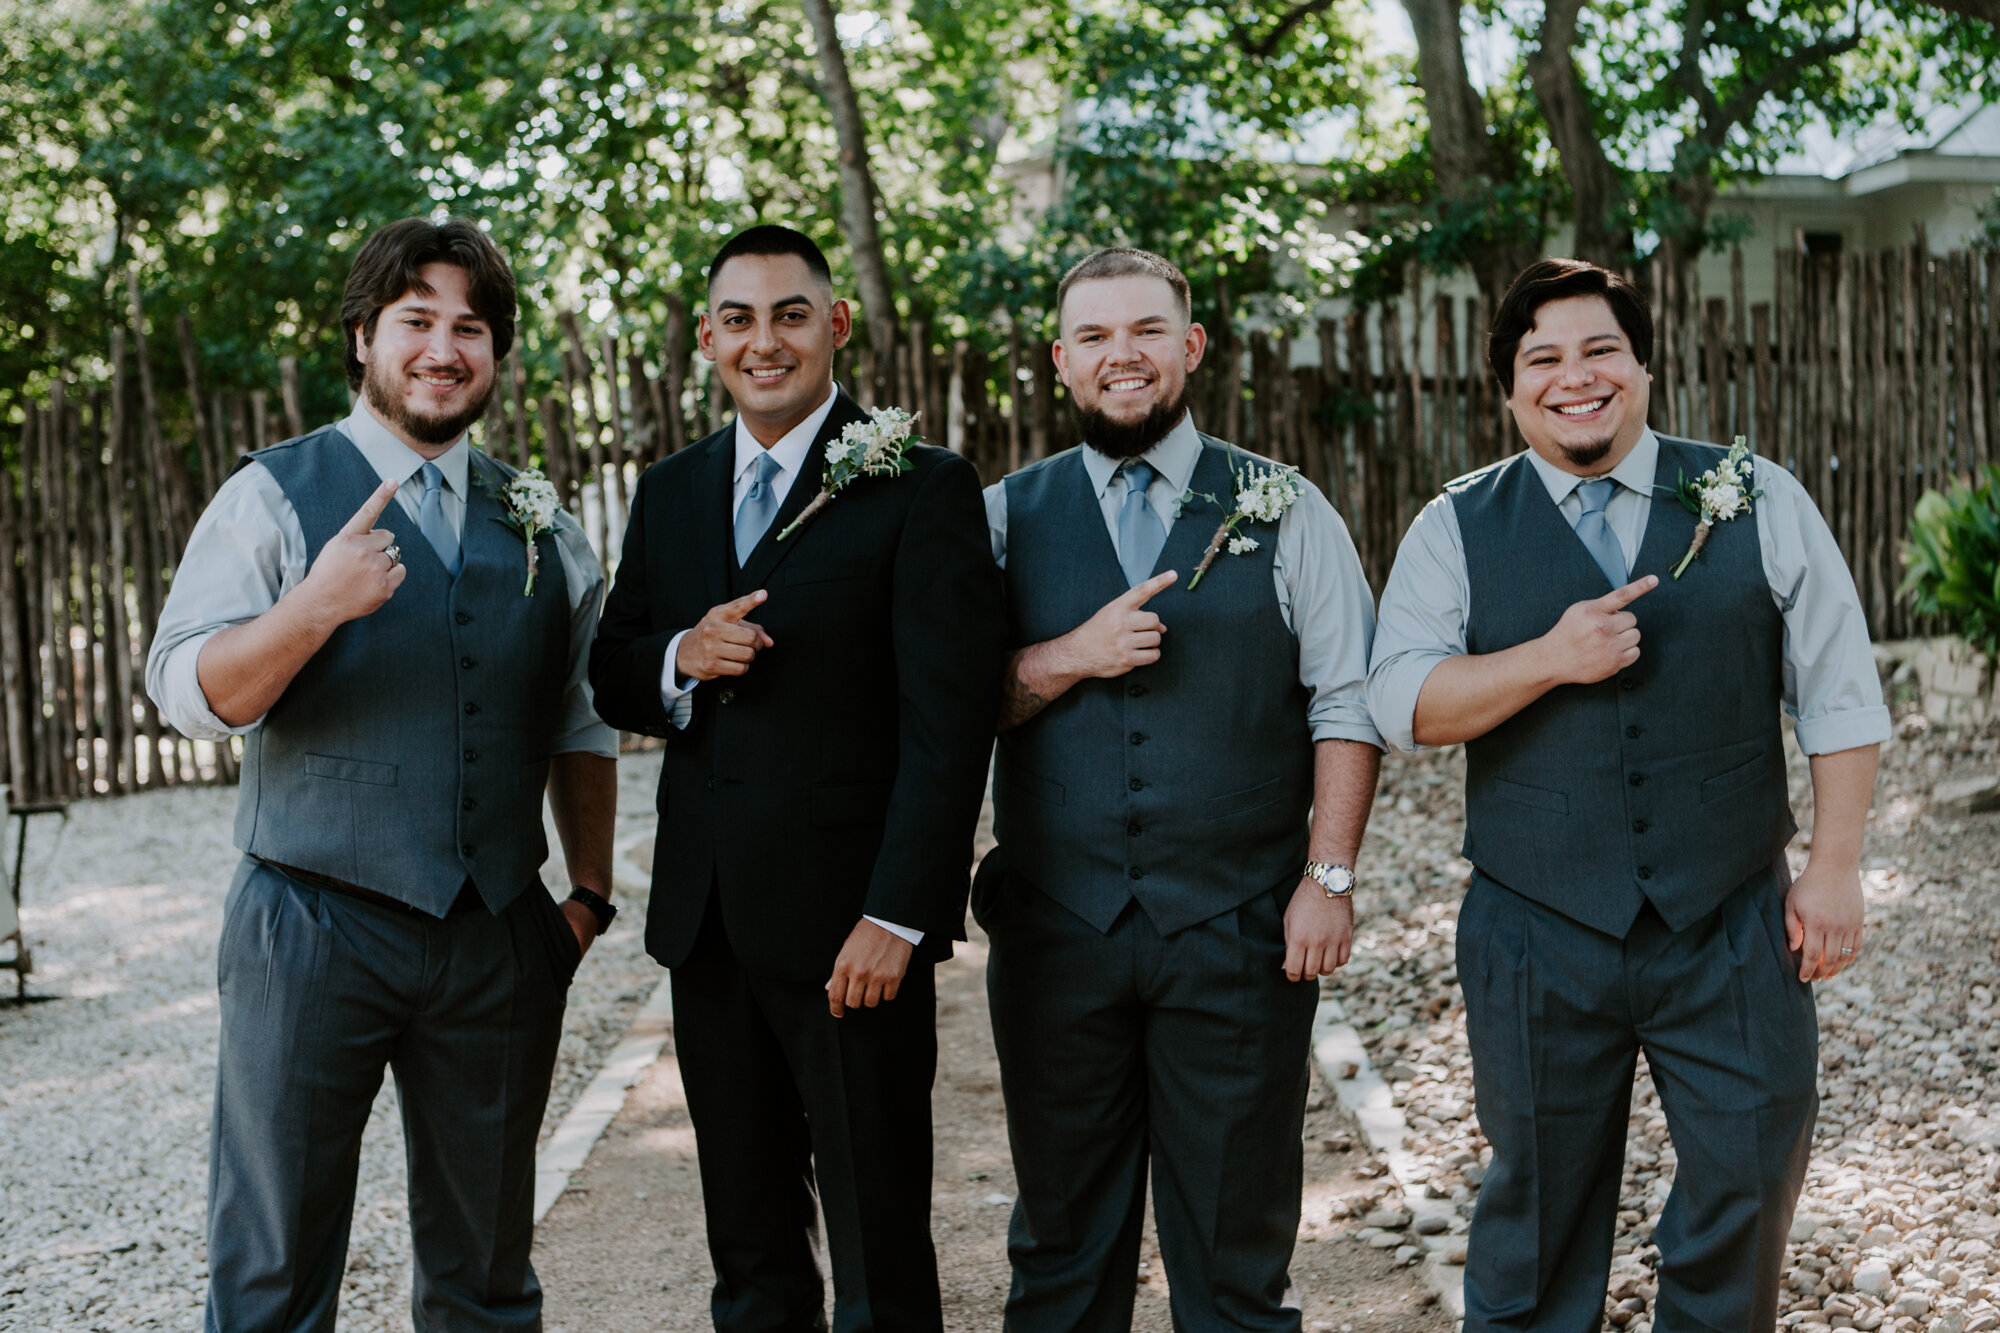 Groom and groomsmen portraits. Radiant Bohemian Hill Country Wedding at Gruene Estate in New Braunfels, TX